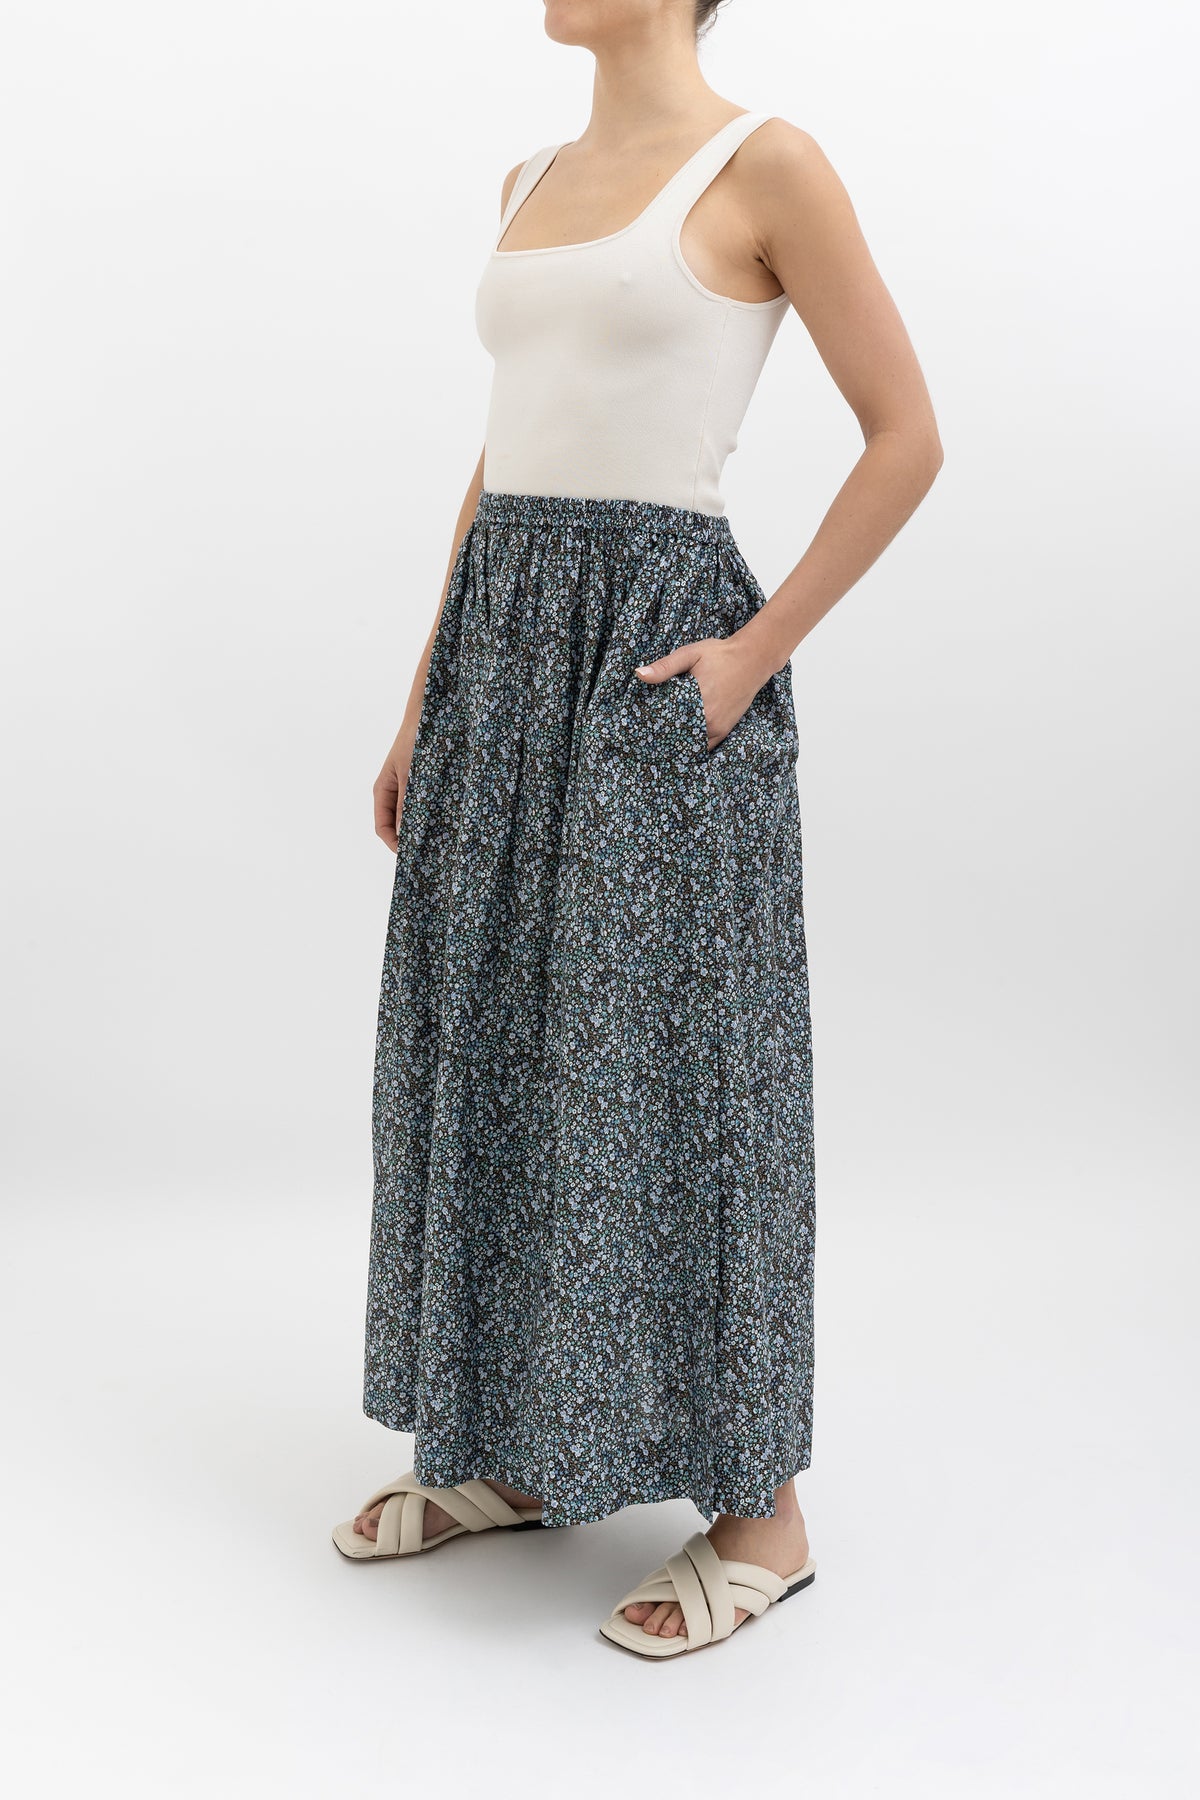 matteau-blue-floral-elasticated-maxi-skirt-with-side-slits-12-b1c7